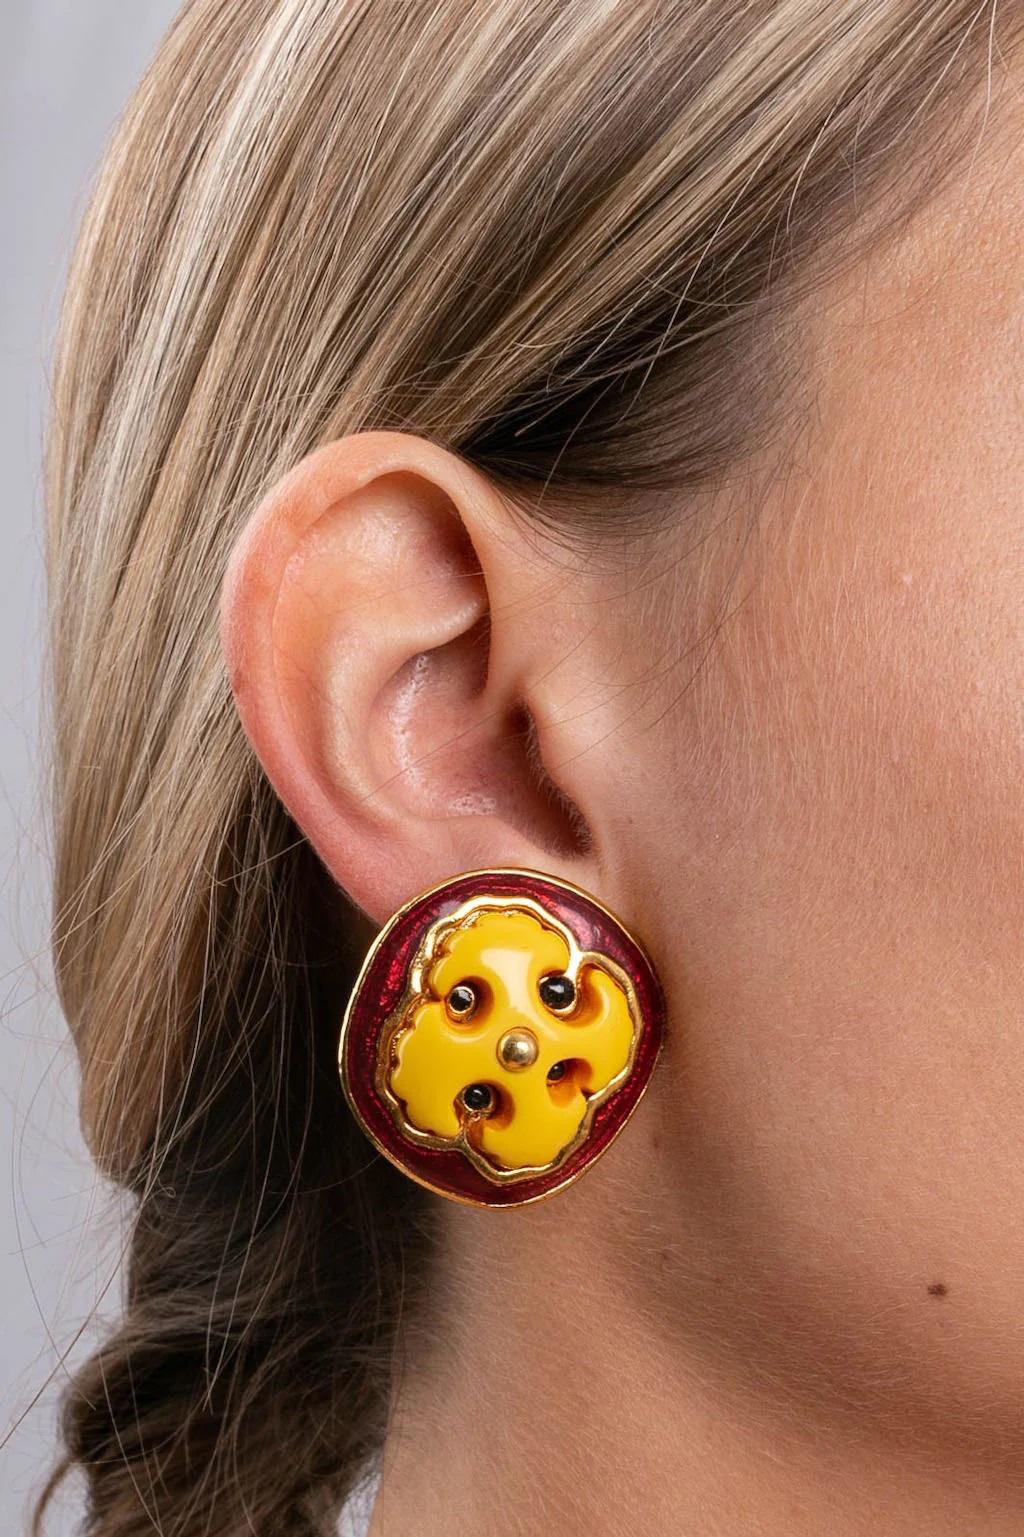 Guy Laroche - Gilded metal and resin clip-on earrings.

Additional information:
Dimensions: 
3.2 W x 3.2 H cm (1.25